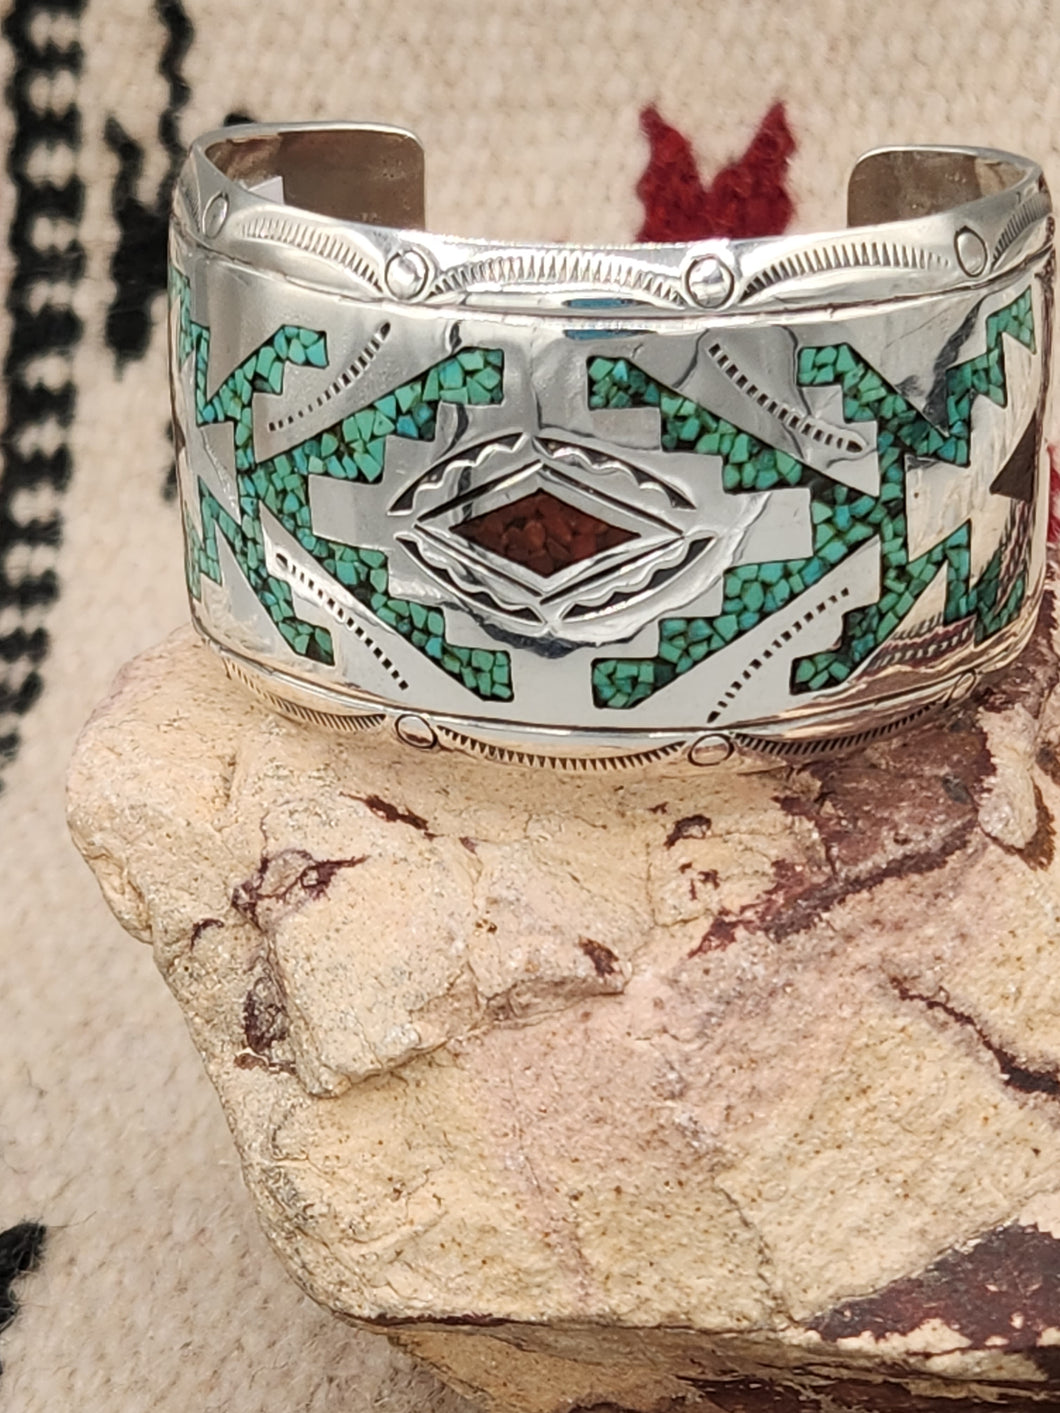 TURQUOISE & CORAL CHIP INLAY CUFF BRACELET - ROBERT BECENTI